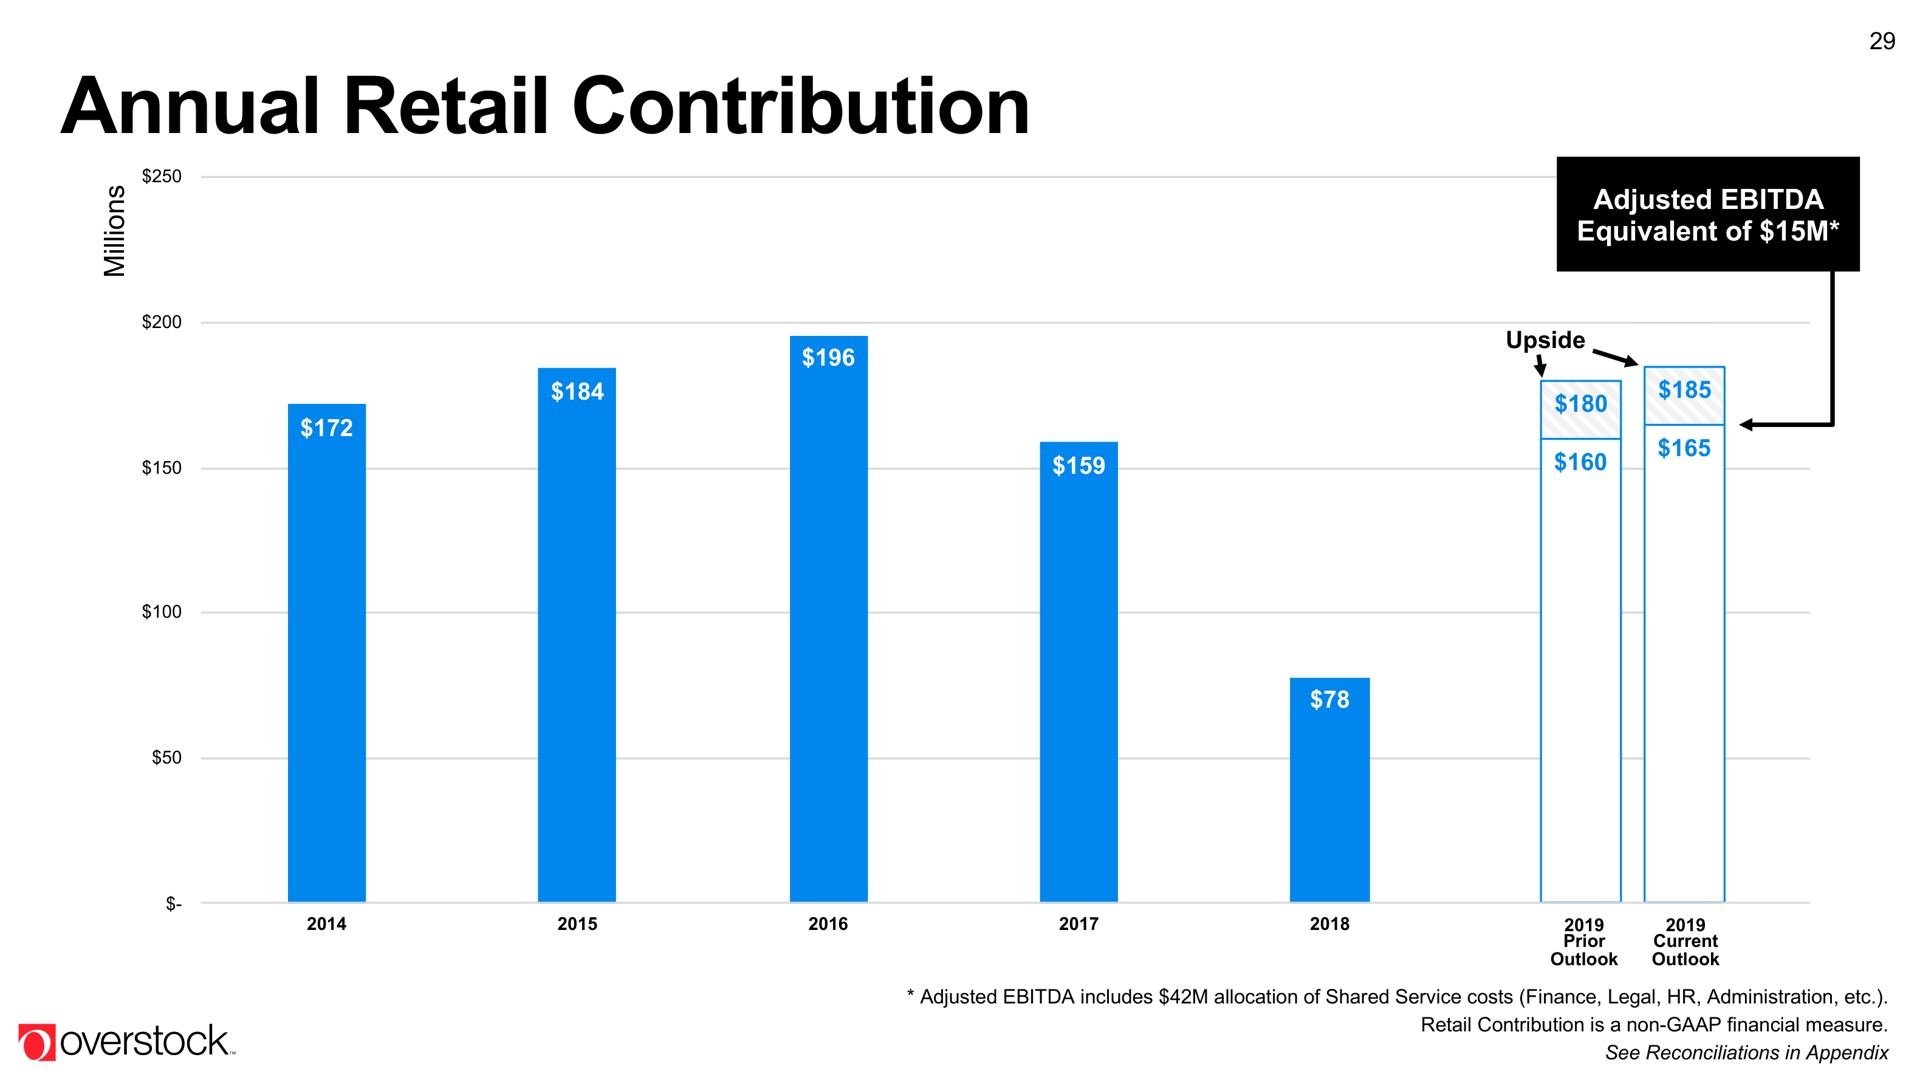 annual retail contribution | Overstock